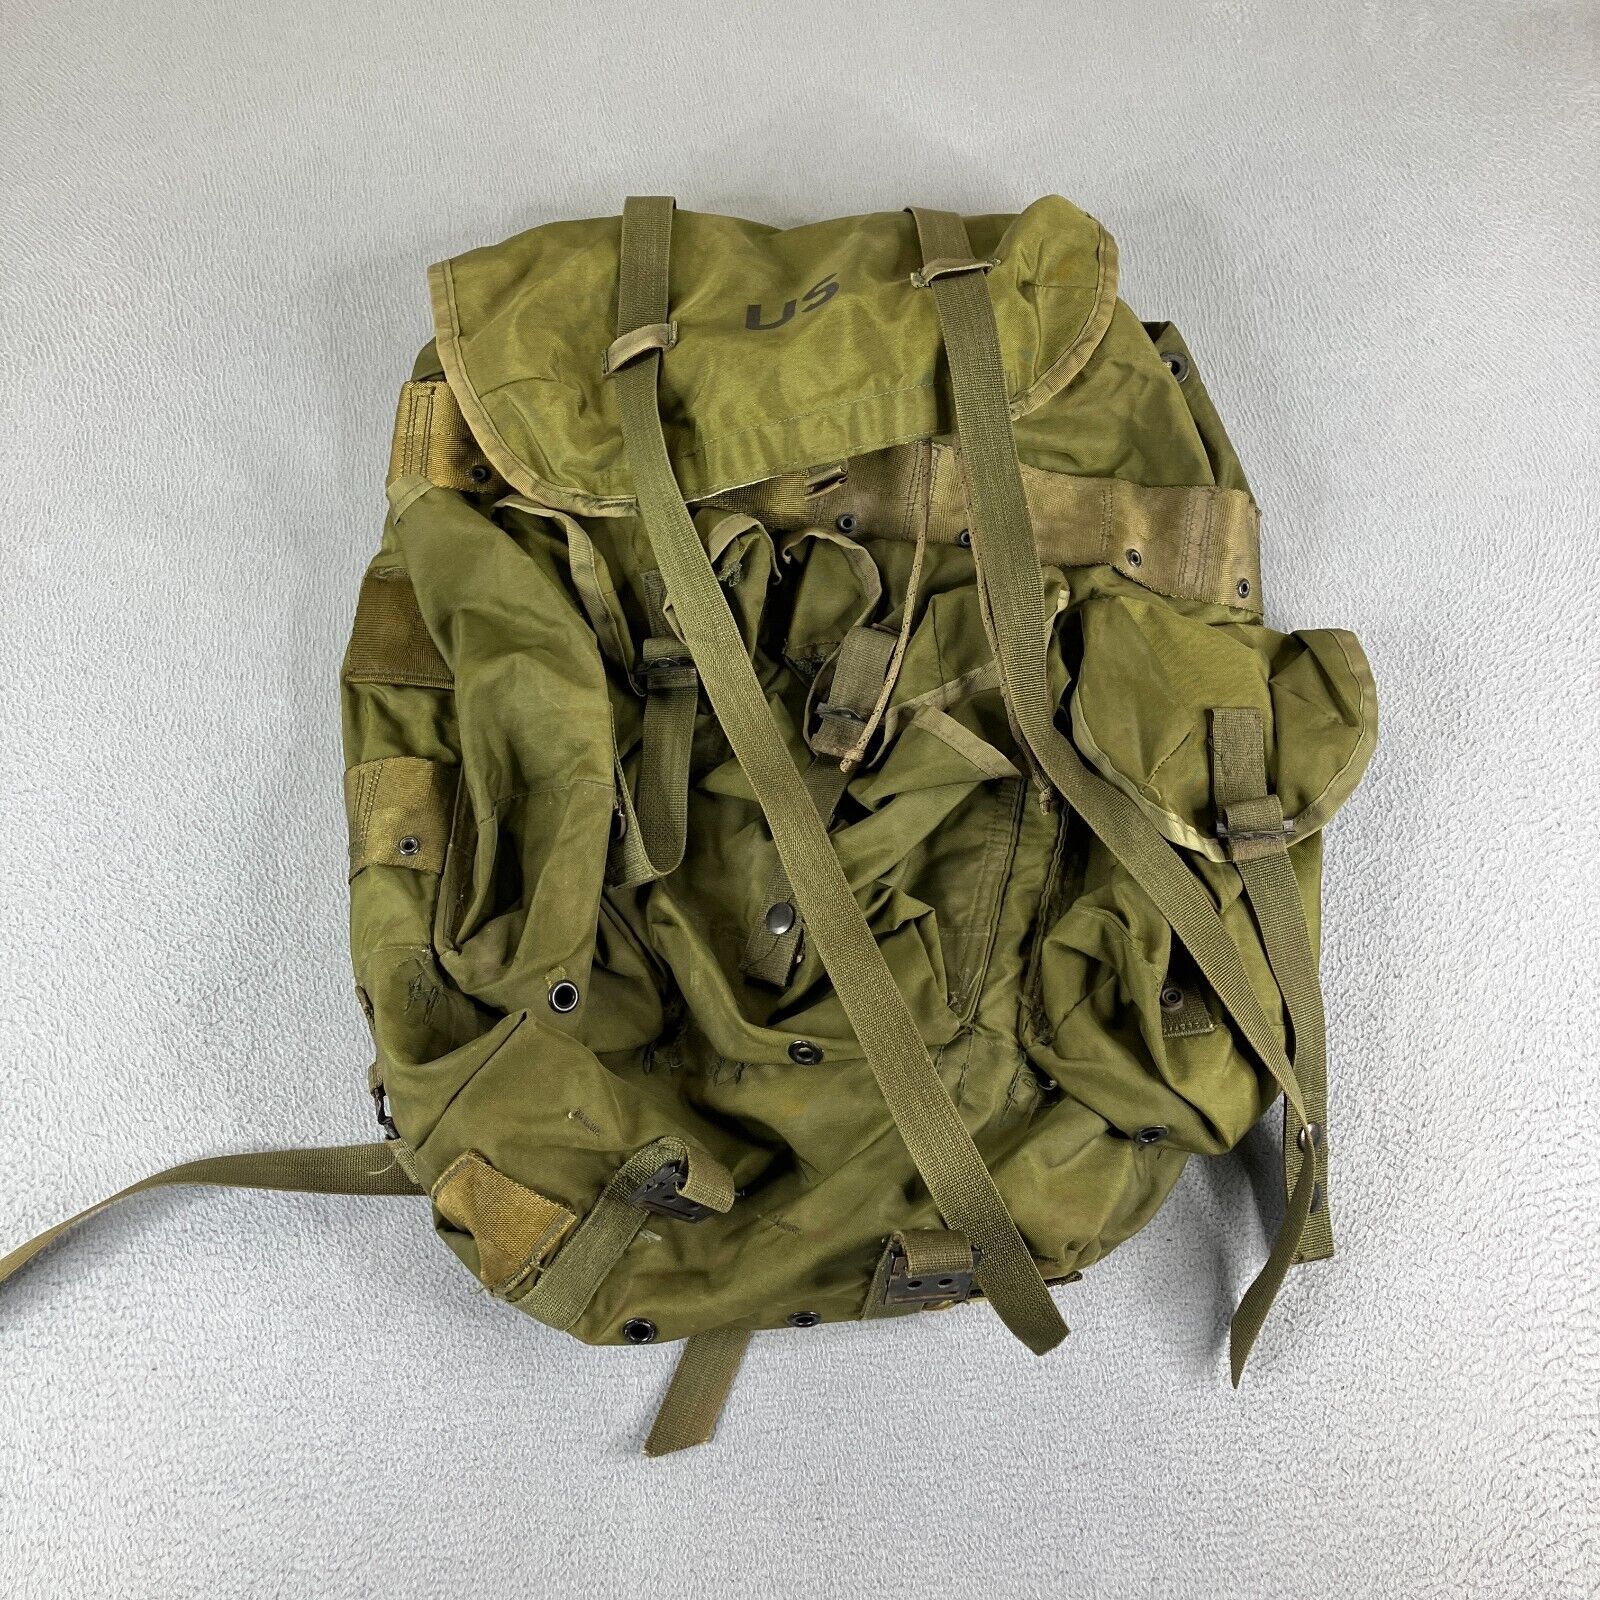 Vintage US Army Backpack Medium Green Field Pack Combat Nylon LC-1 Military Bag